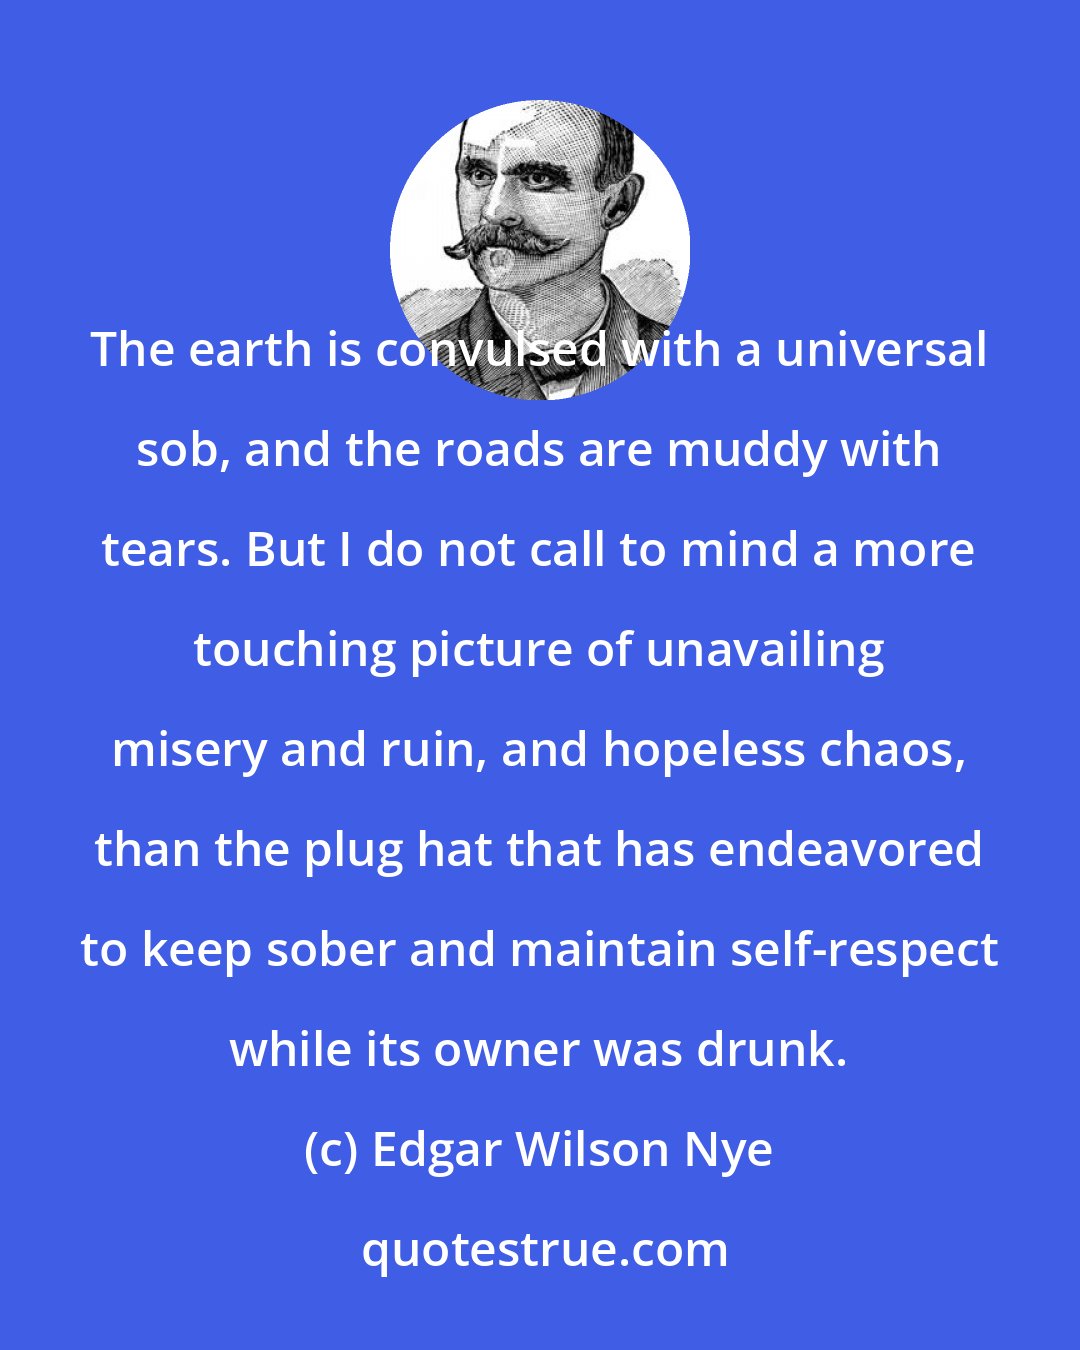 Edgar Wilson Nye: The earth is convulsed with a universal sob, and the roads are muddy with tears. But I do not call to mind a more touching picture of unavailing misery and ruin, and hopeless chaos, than the plug hat that has endeavored to keep sober and maintain self-respect while its owner was drunk.